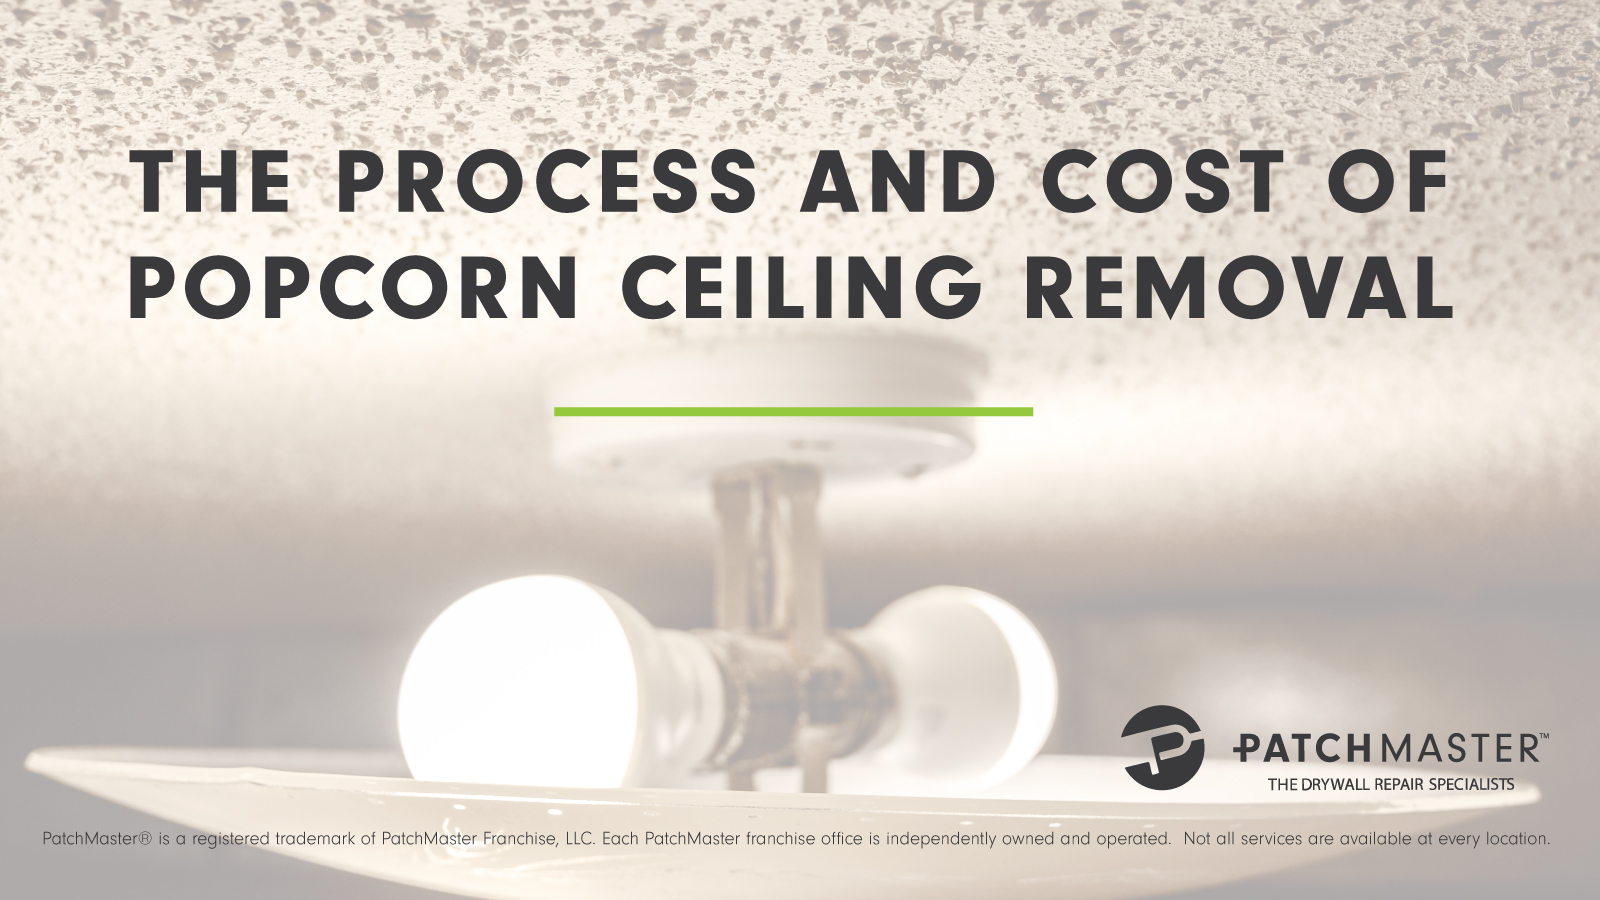 The Process and Cost of Popcorn Ceiling Removal